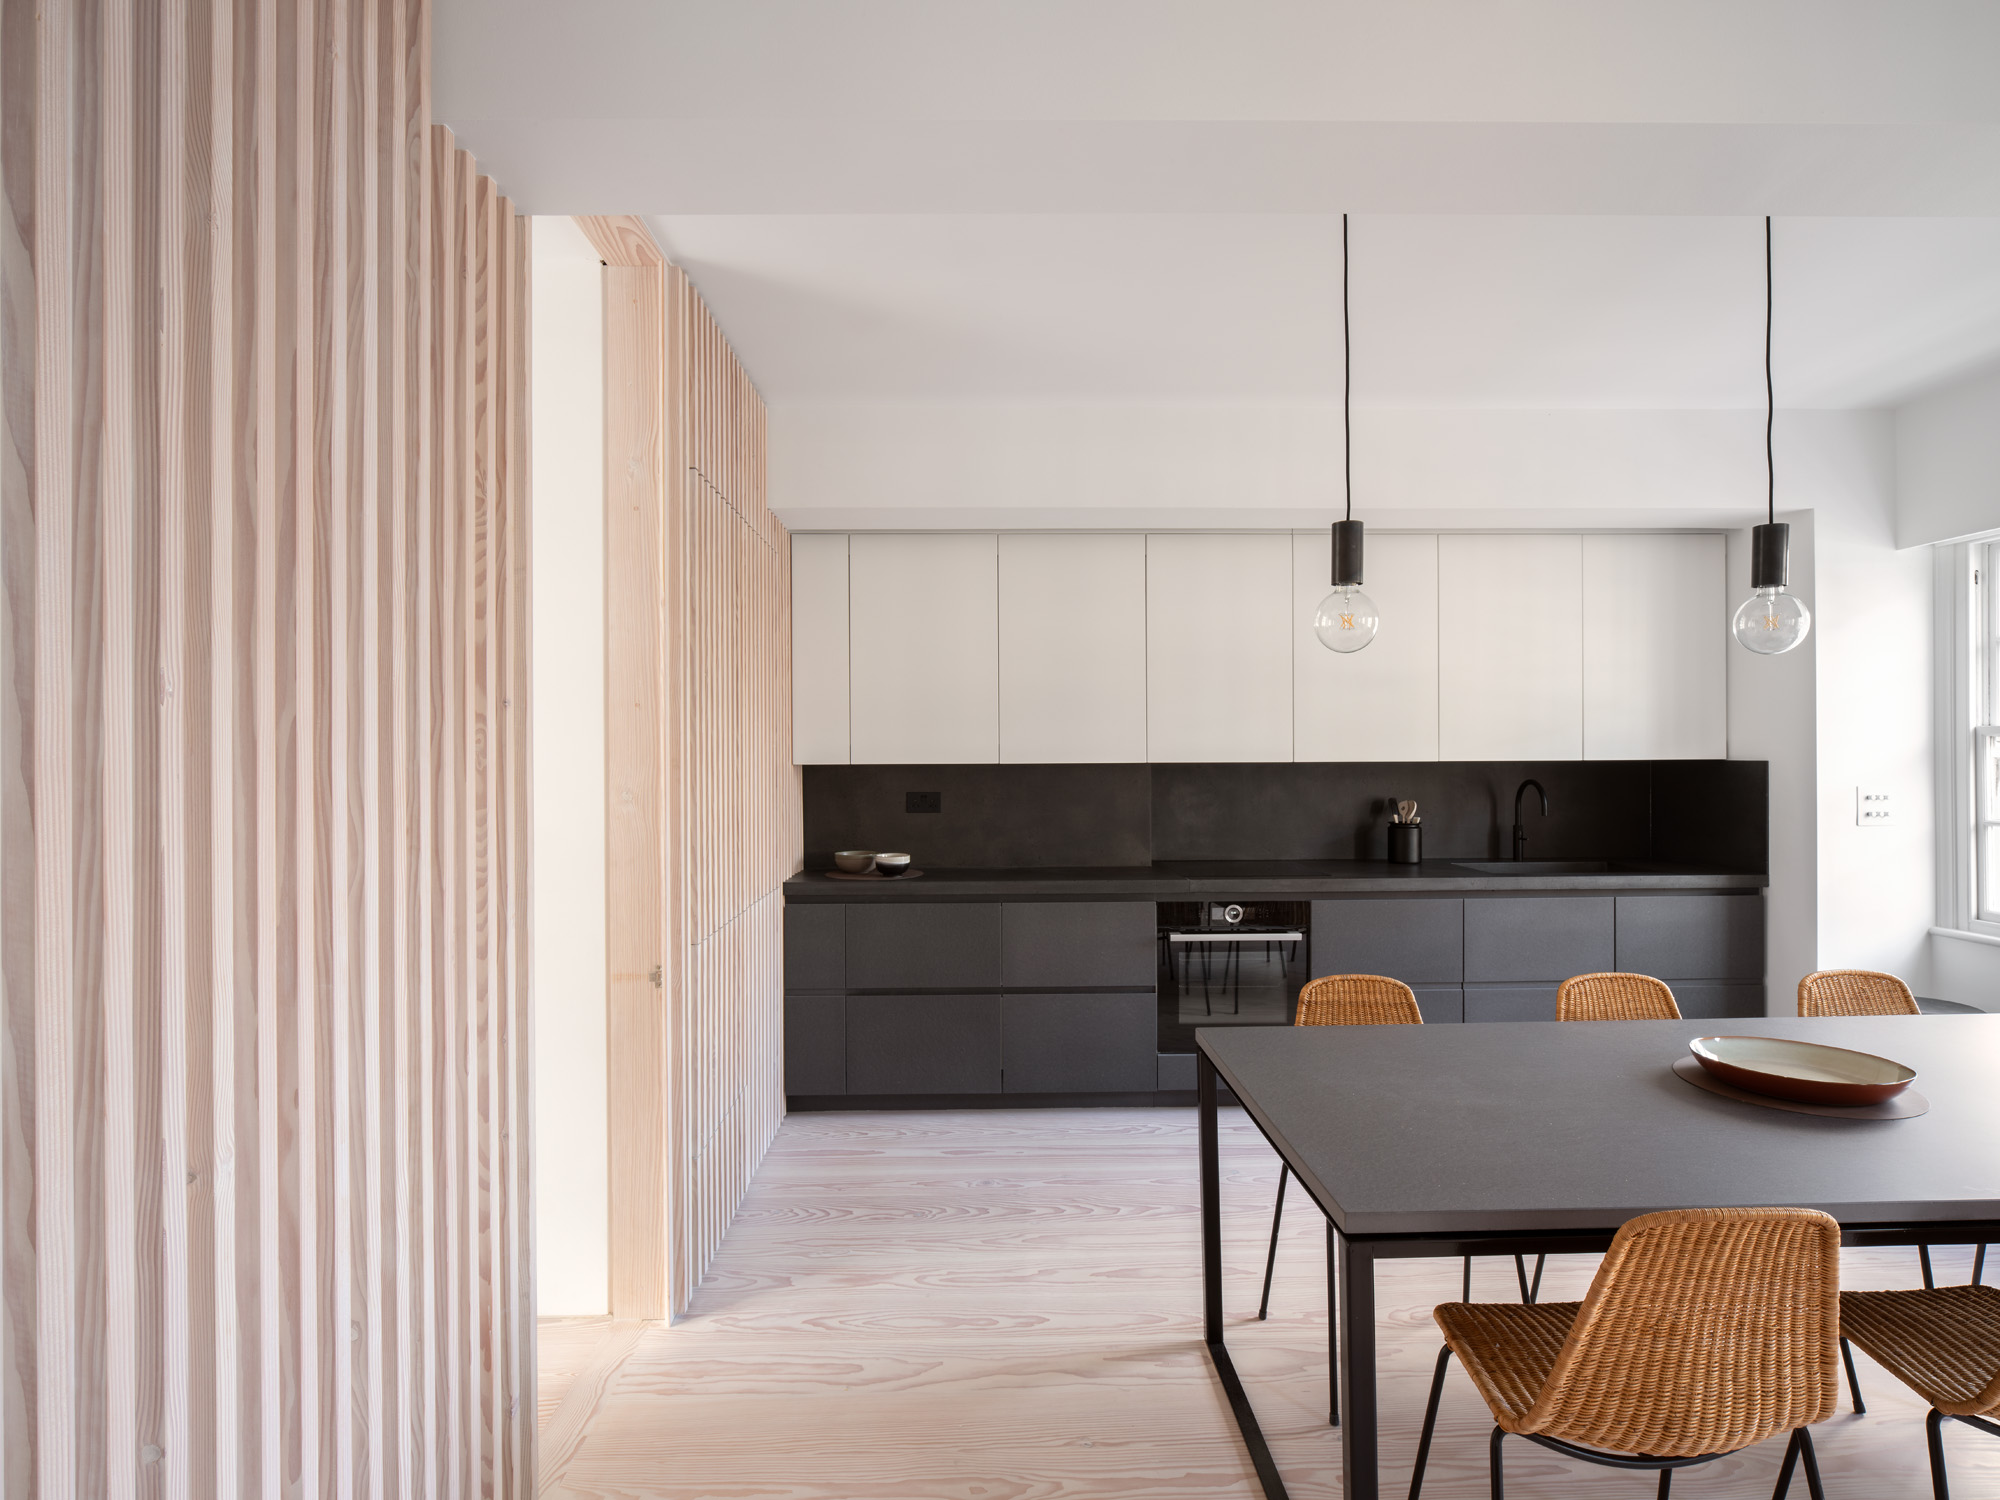 Kitchen by Proctor & Shaw - minimalist contemporary architecture and interior design in London